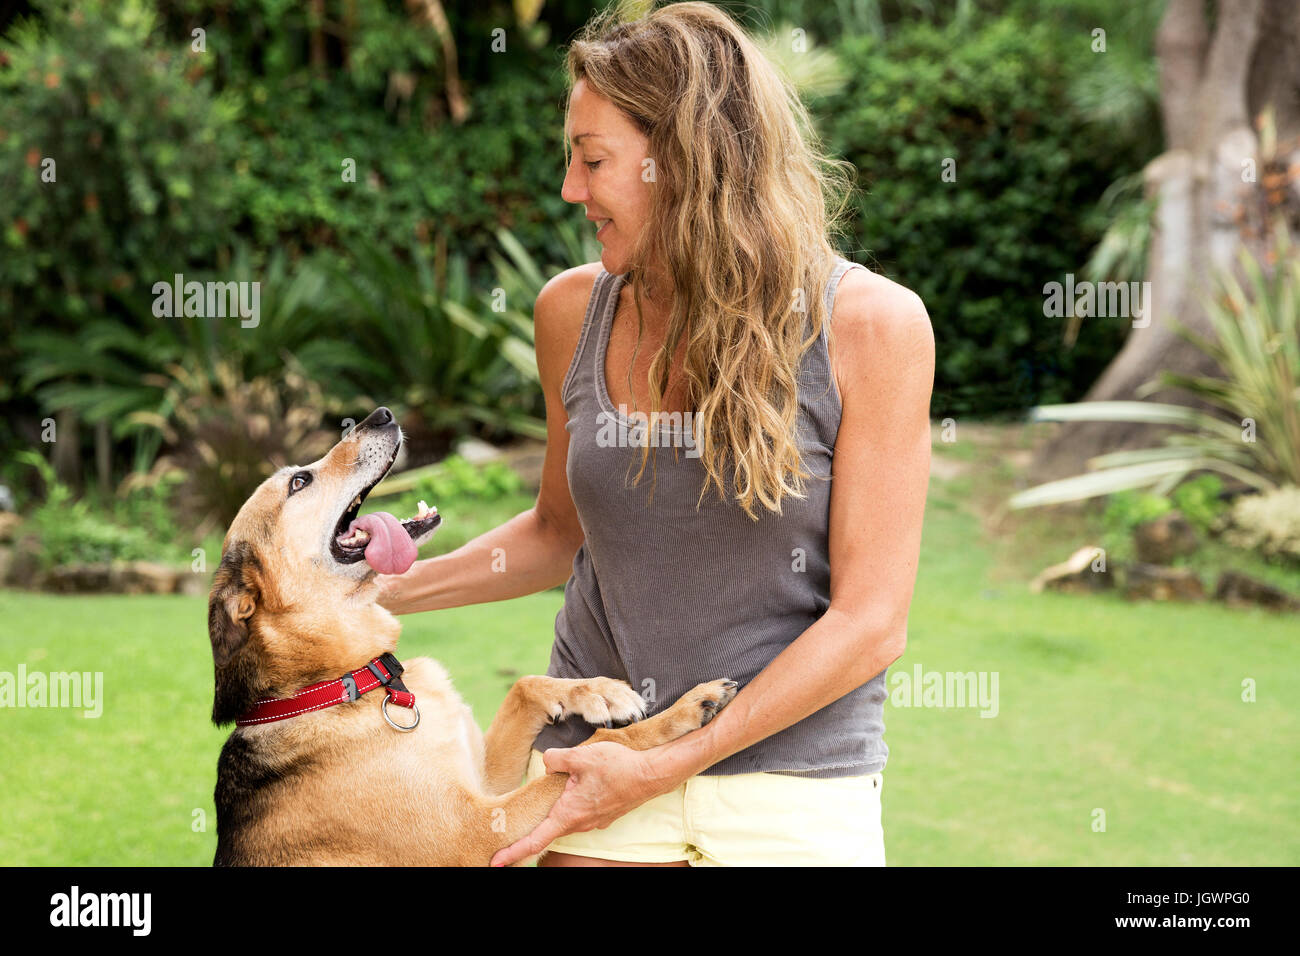 Woman stroking excited dog Stock Photo